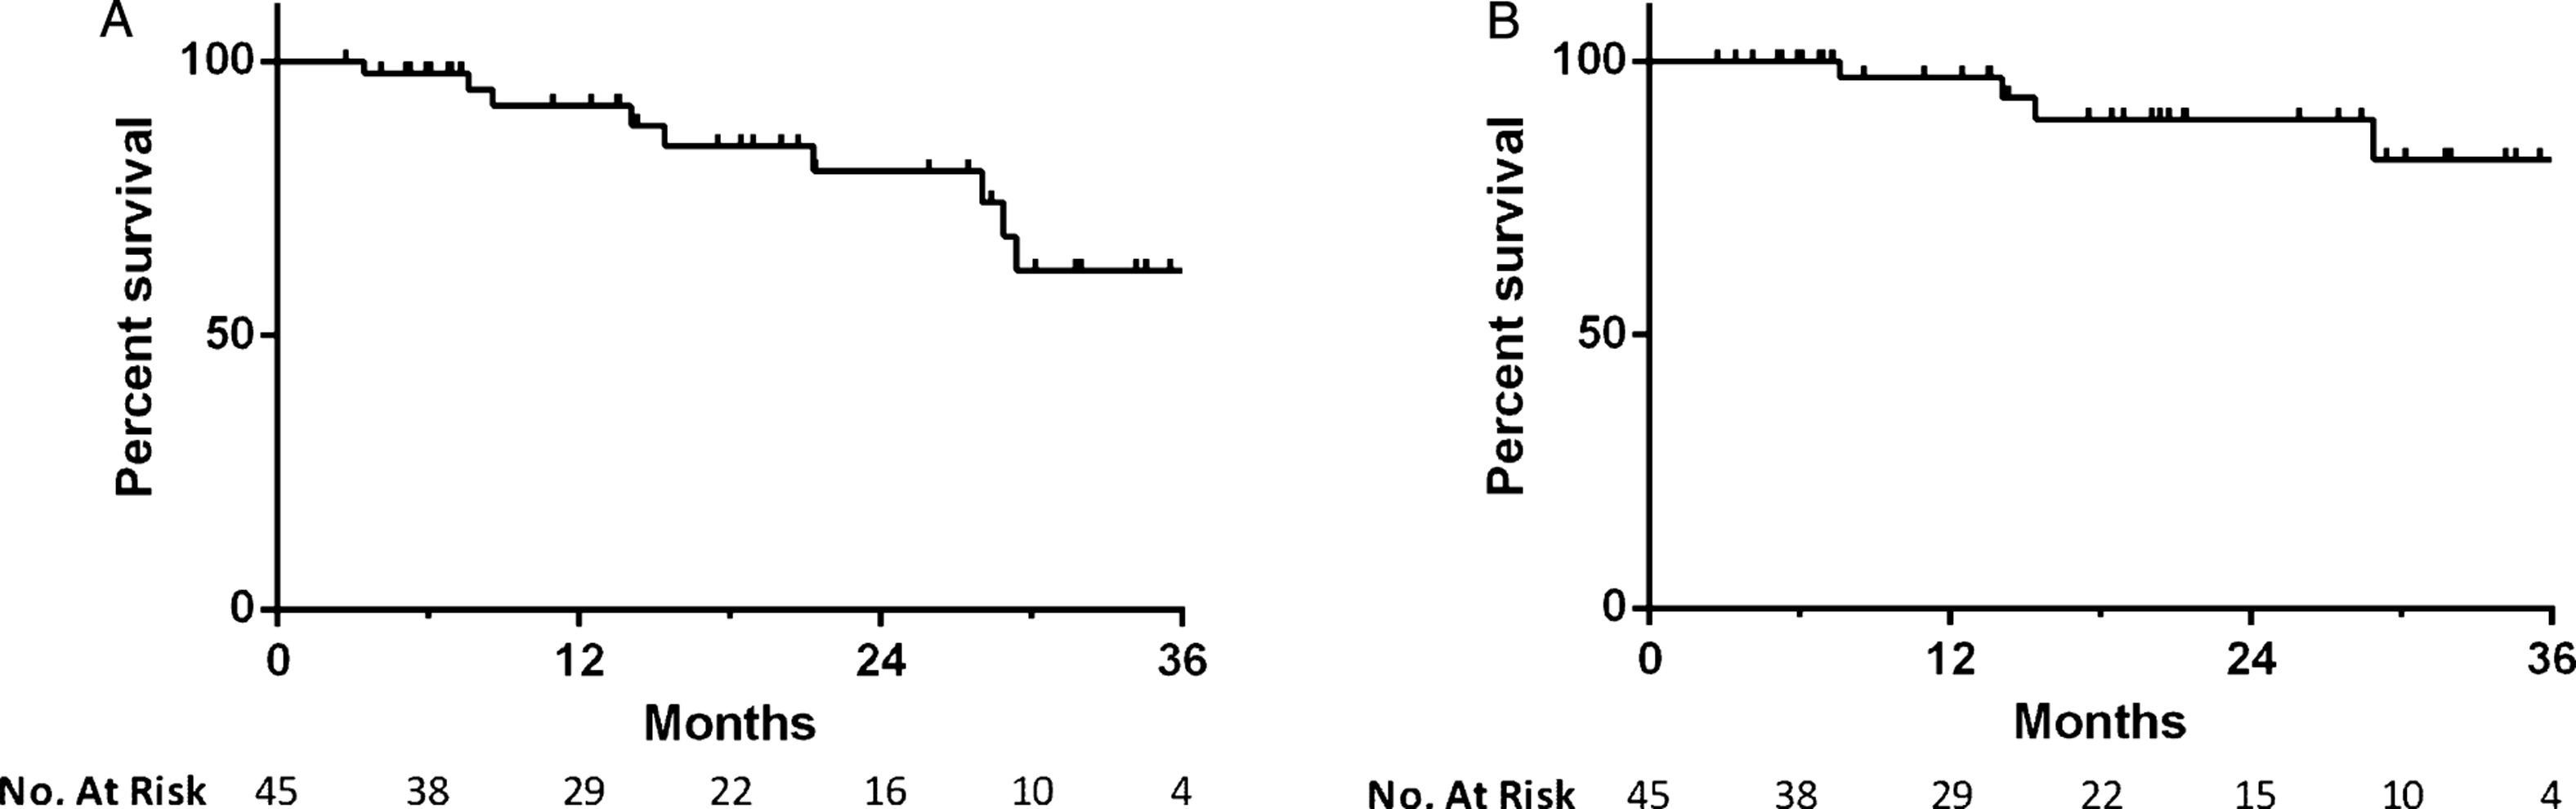 Kaplan-Meier plot of (a) all-cause and (b) bladder cancer specific mortality in patients treated with intravesical gemcitabine and docetaxel.